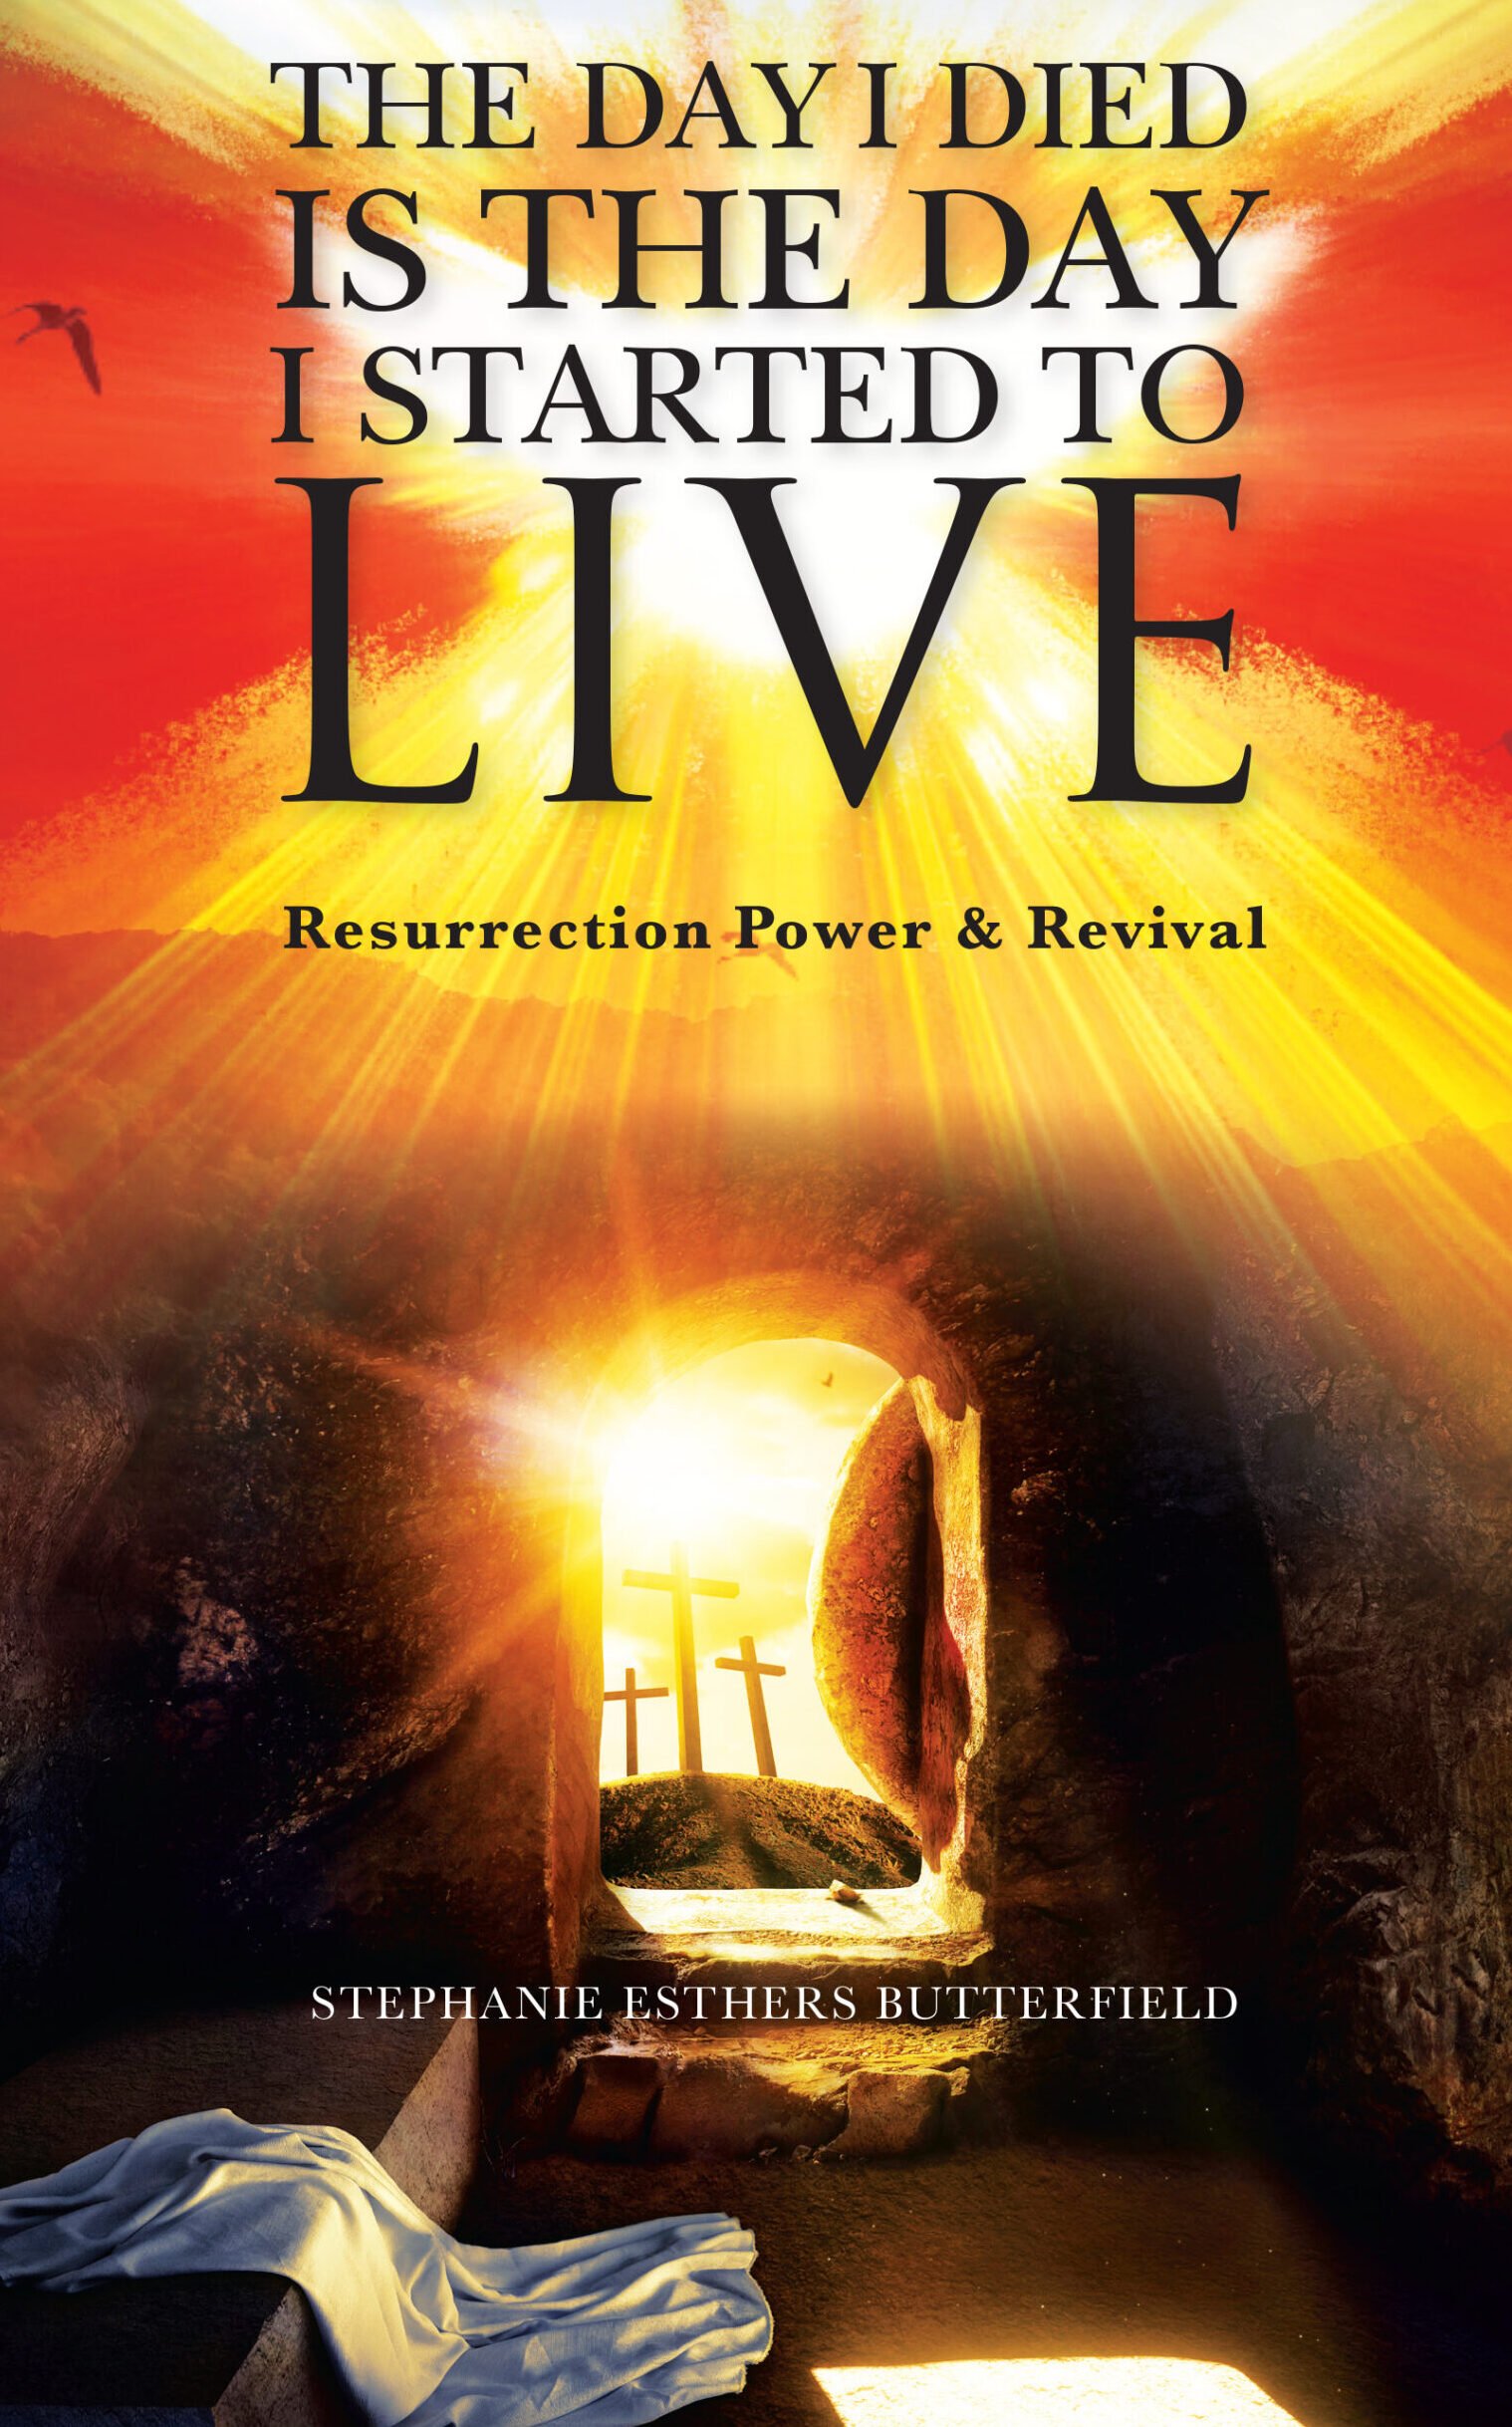 Resurrection Power & Revival: The Day I Died Is The Day I Started To LIVE!